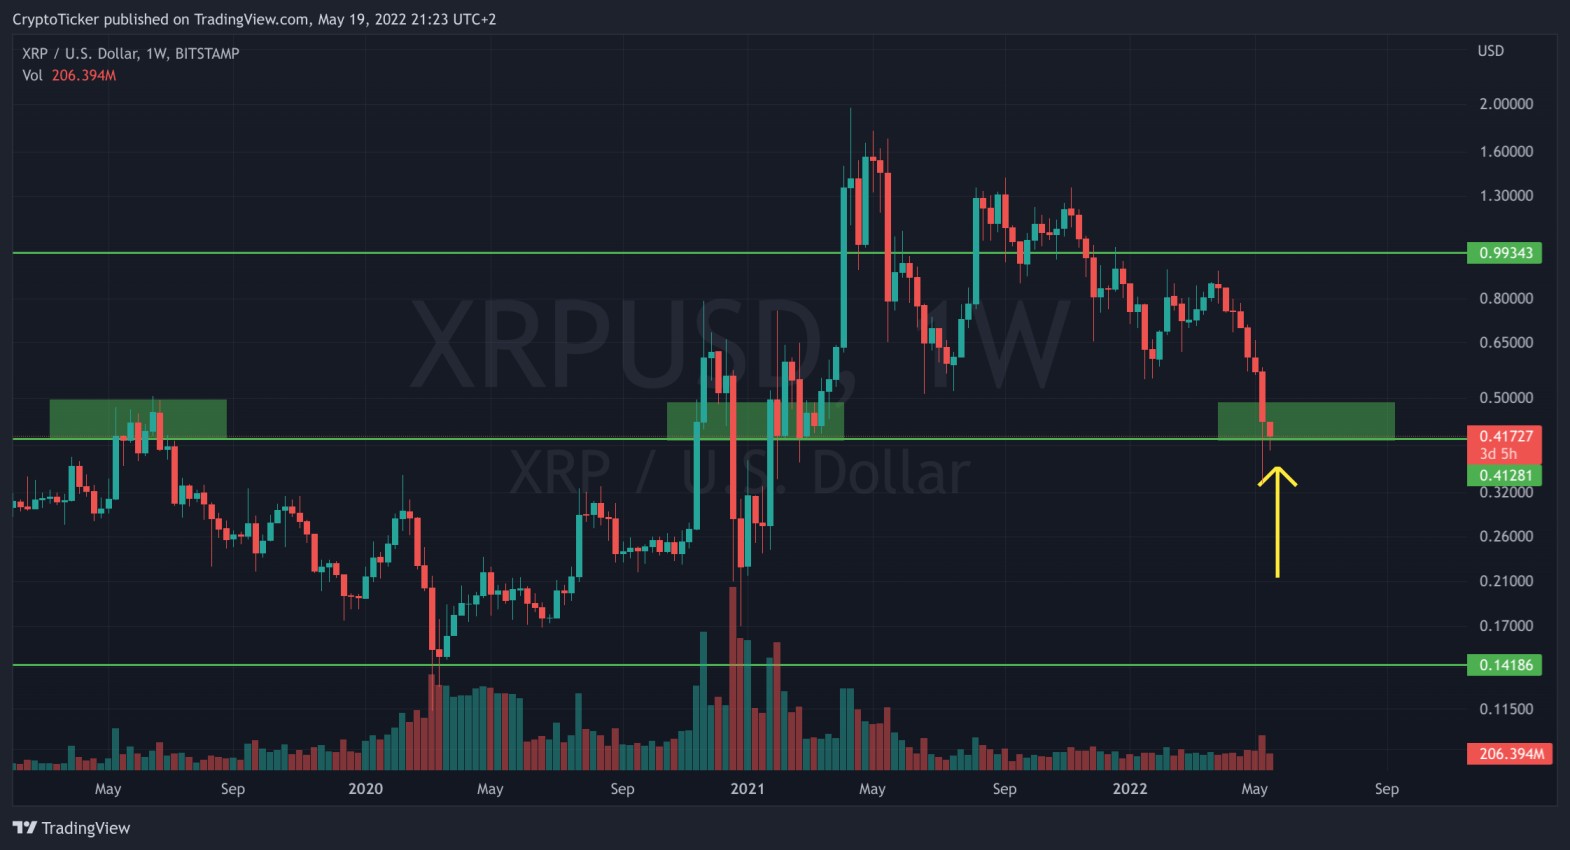 XRP/USD 1-week chart showing XRP important areas